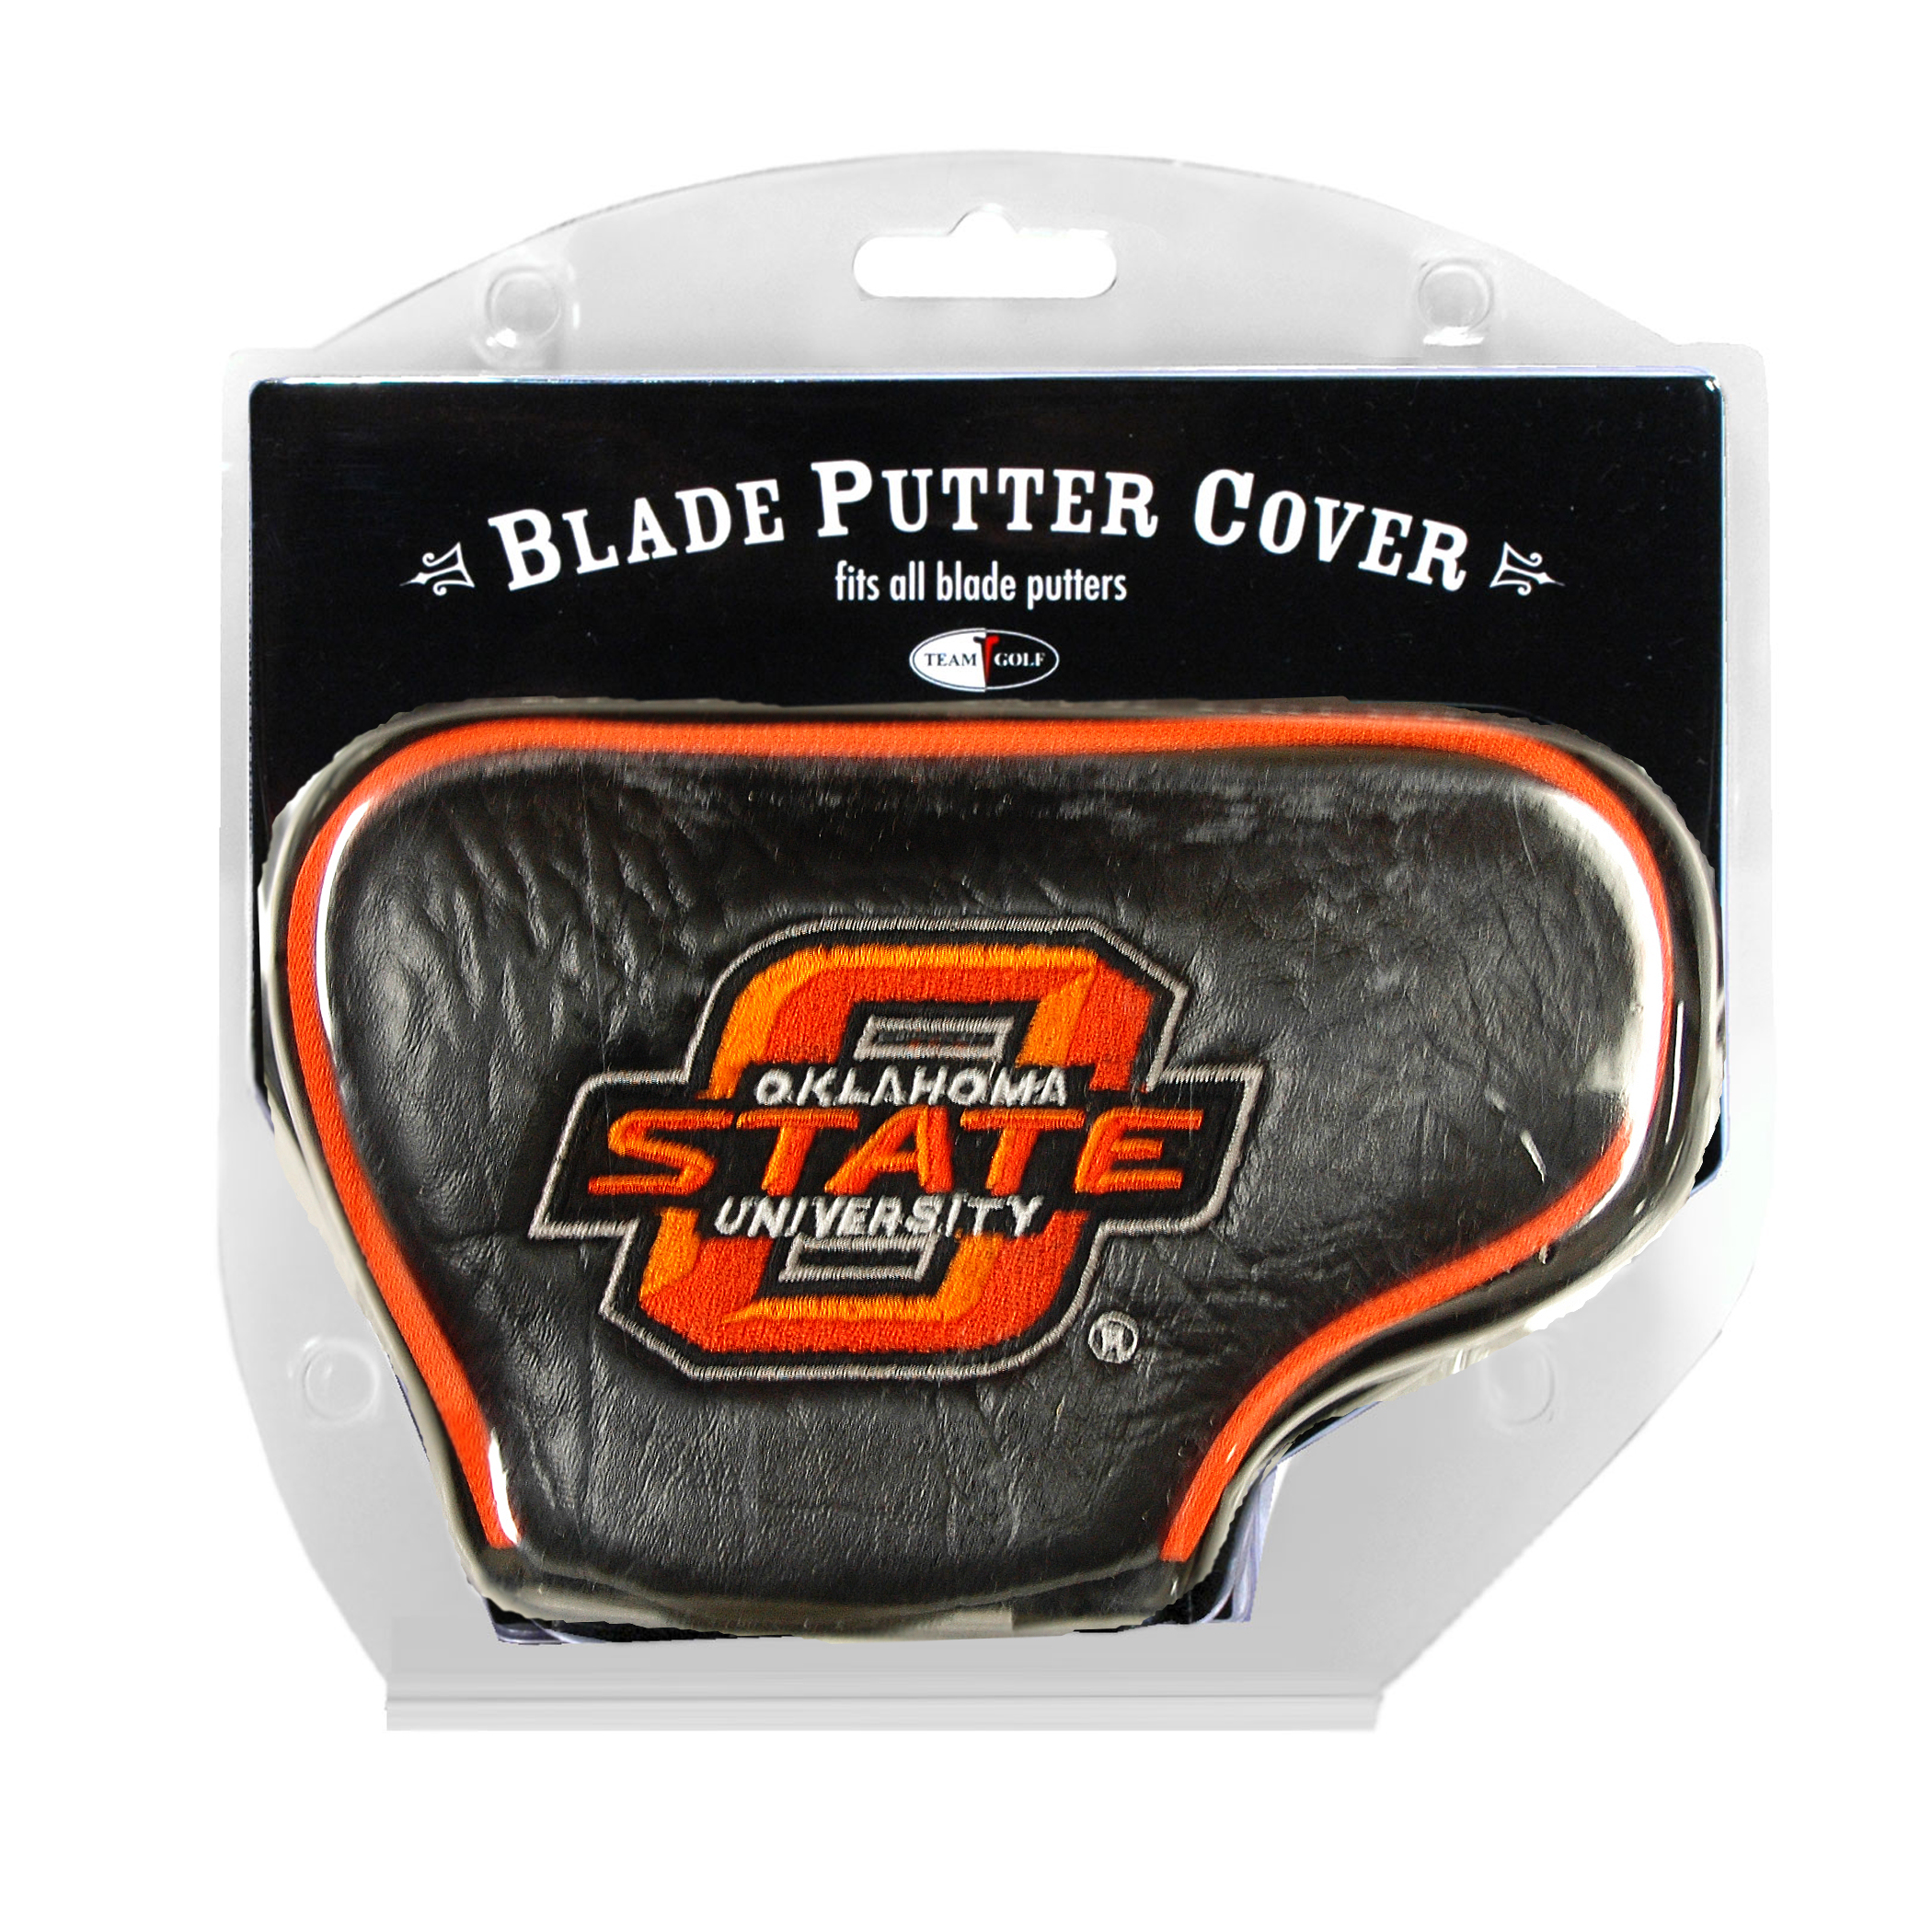 Oklahoma State Blade Putter Cover